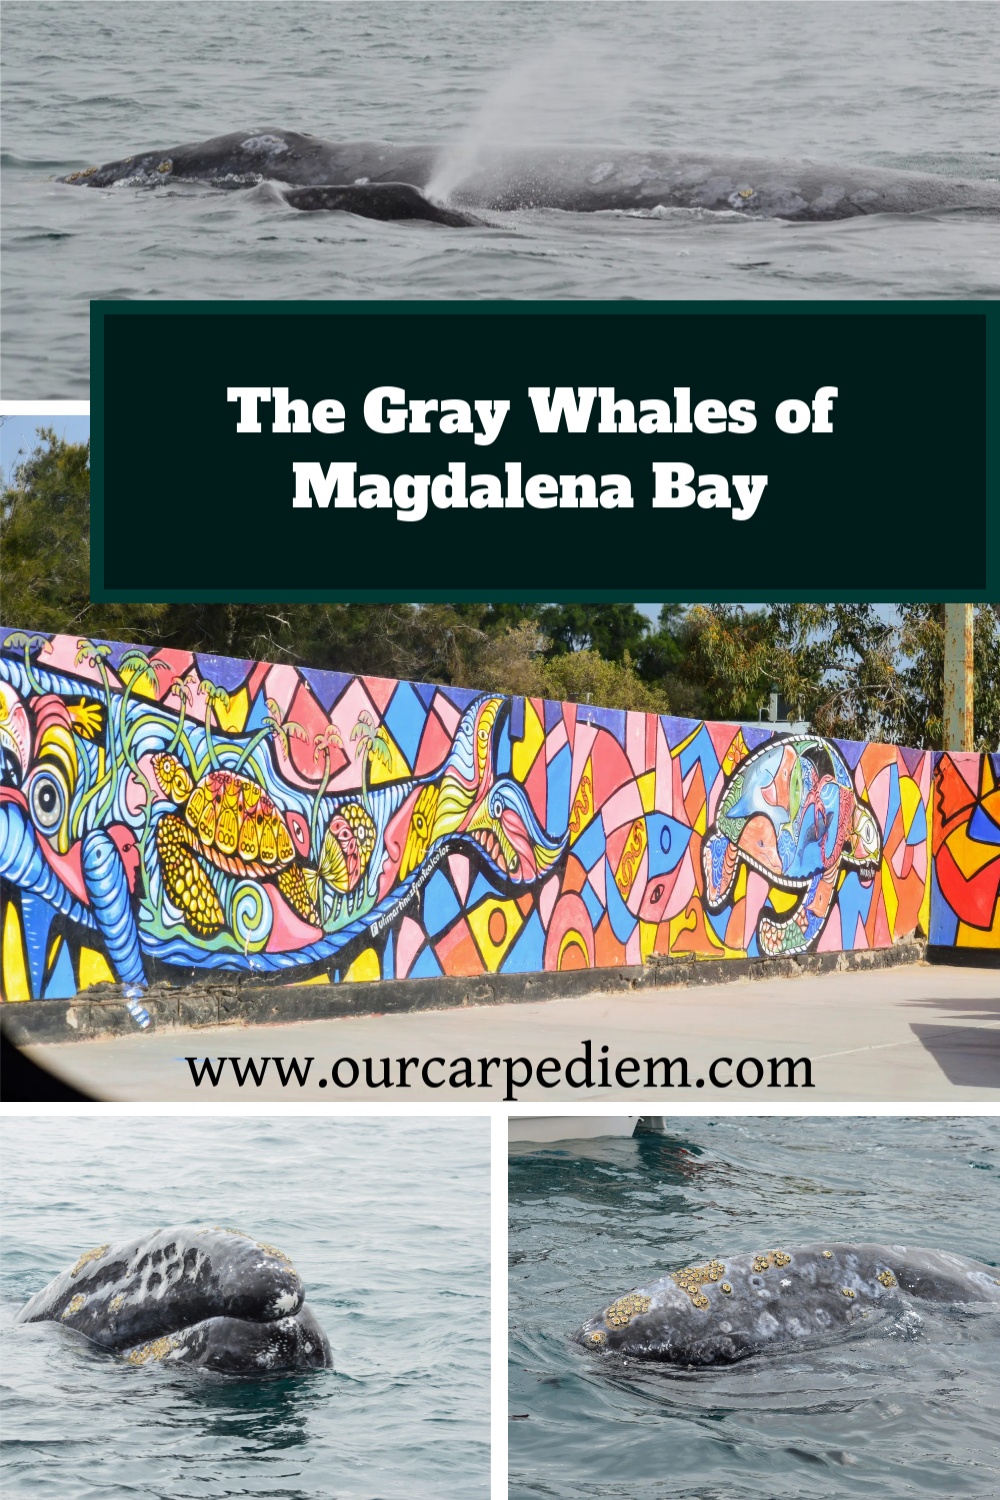 The Best Gray Whale Watching is in Magdalena Bay